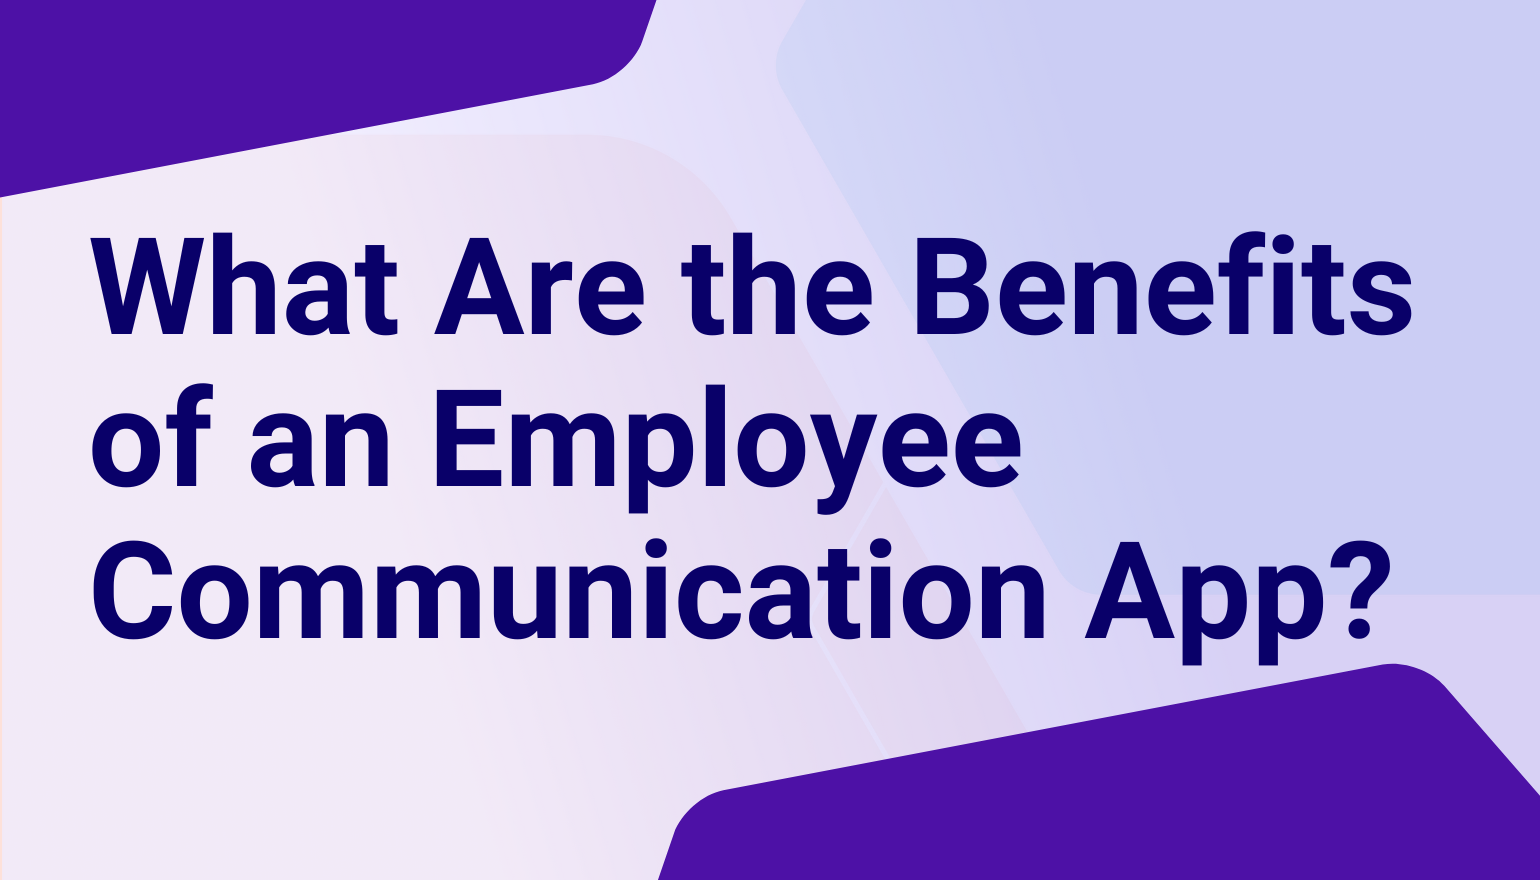 What are the Benefits of an Employee Communication App?